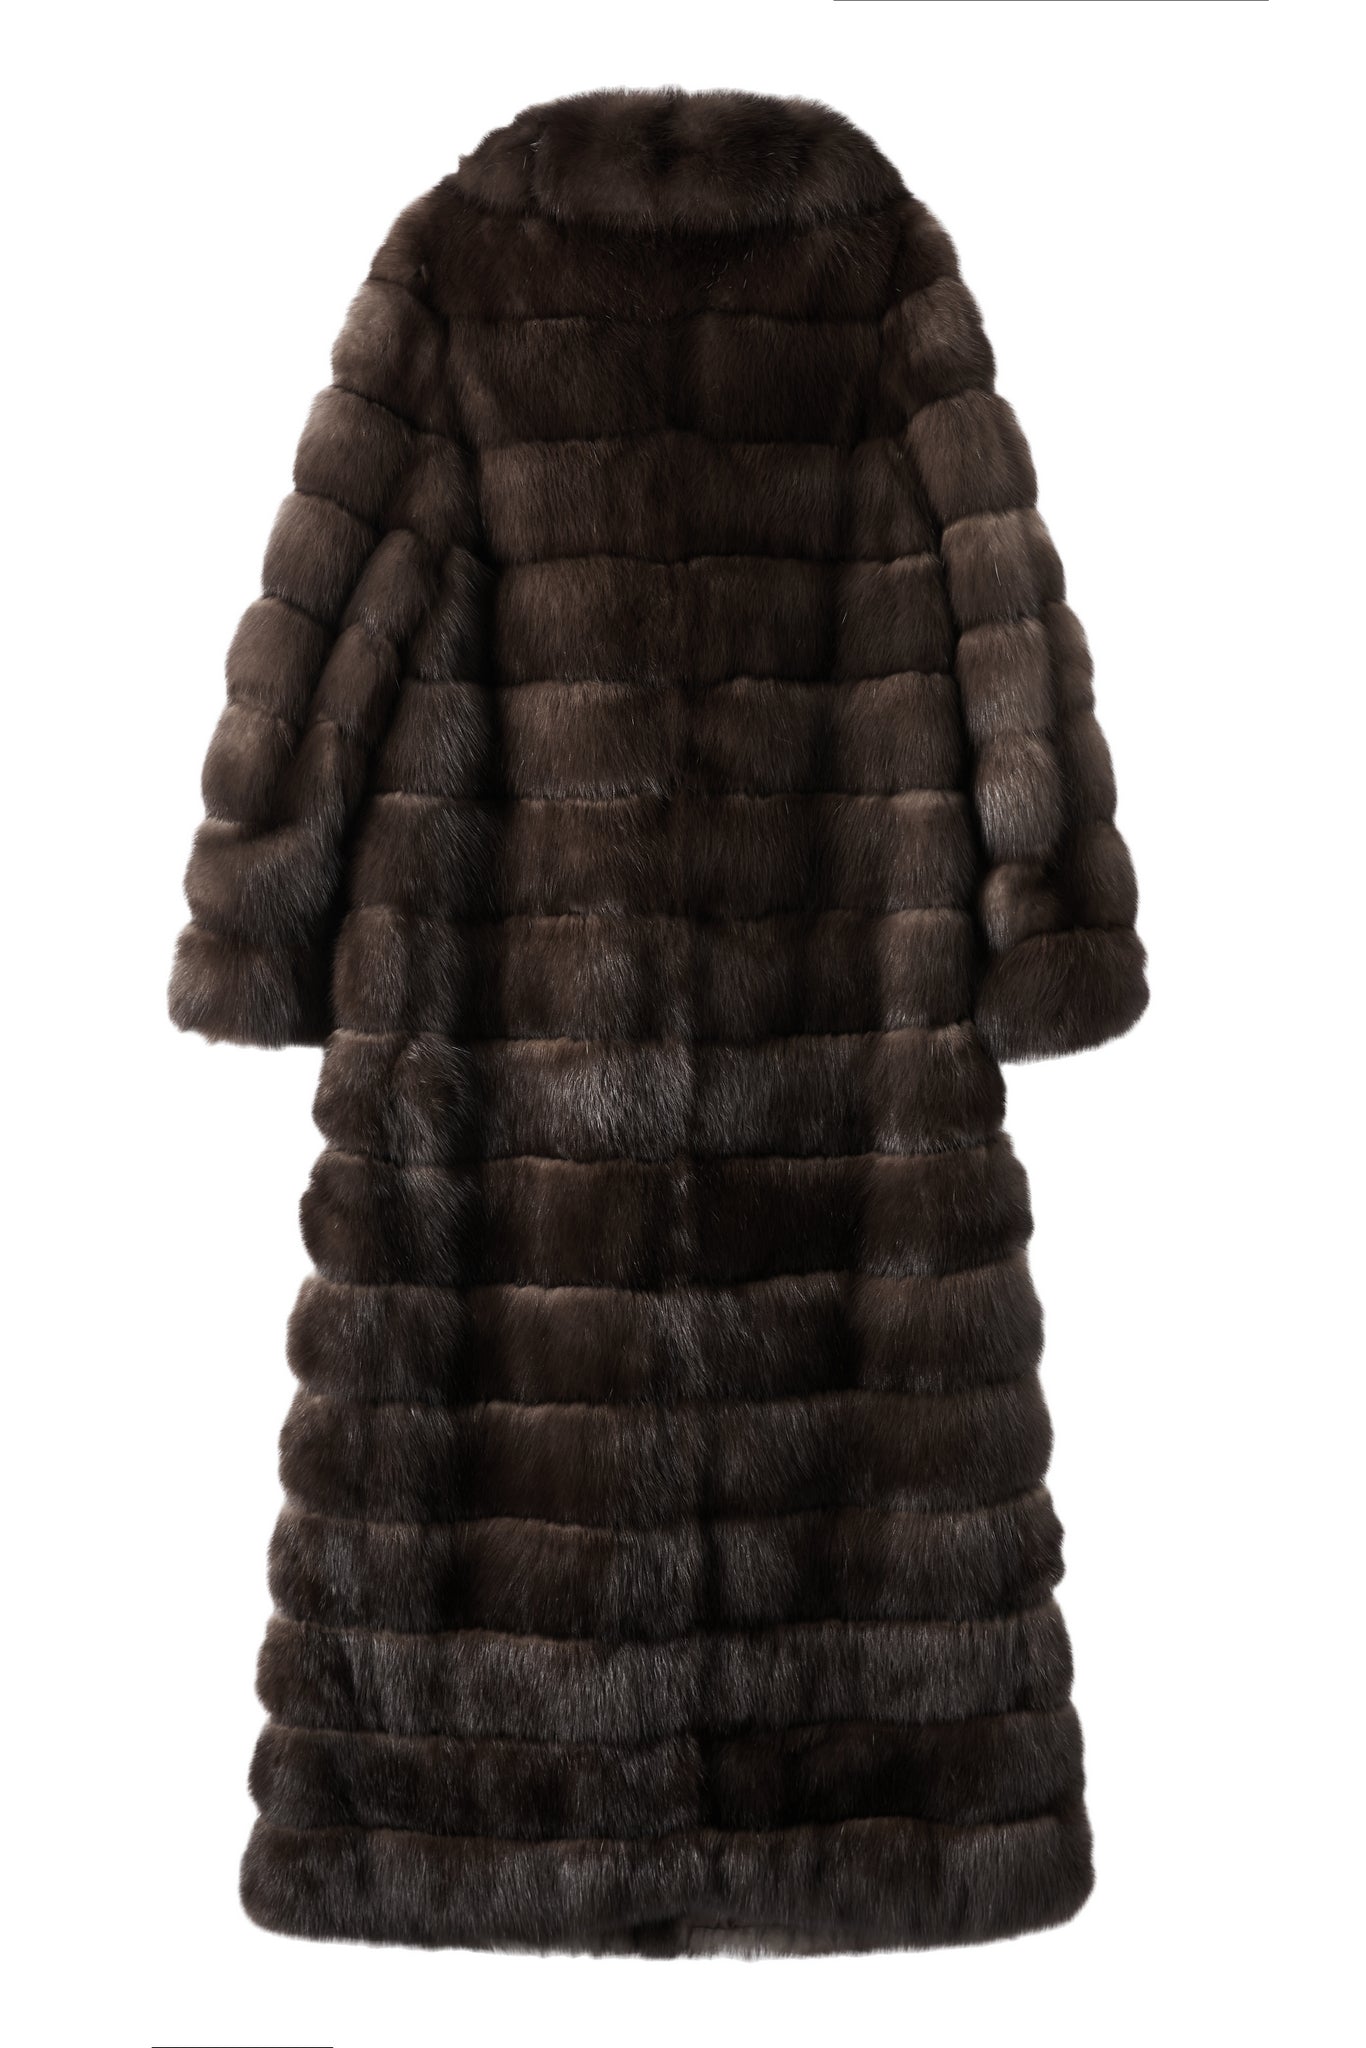 Gorgeous Sable Fur Coat - A Must-Have for Winter